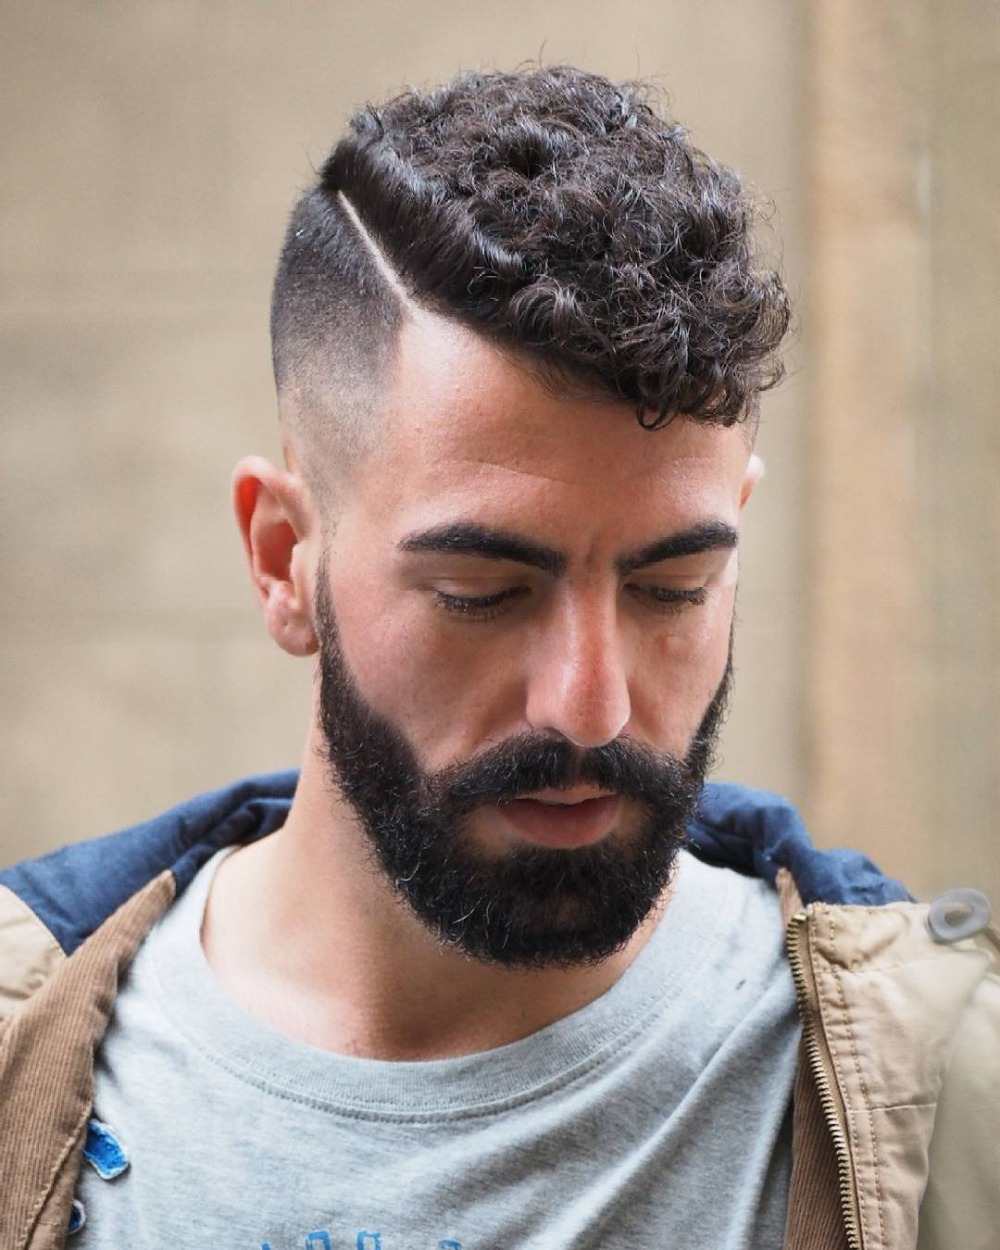 Sidecut Men Discover The 19 Hairstyle Trend For Men With Style Decor Object Your Daily Dose Of Best Home Decorating Ideas Interior Design Inspiration